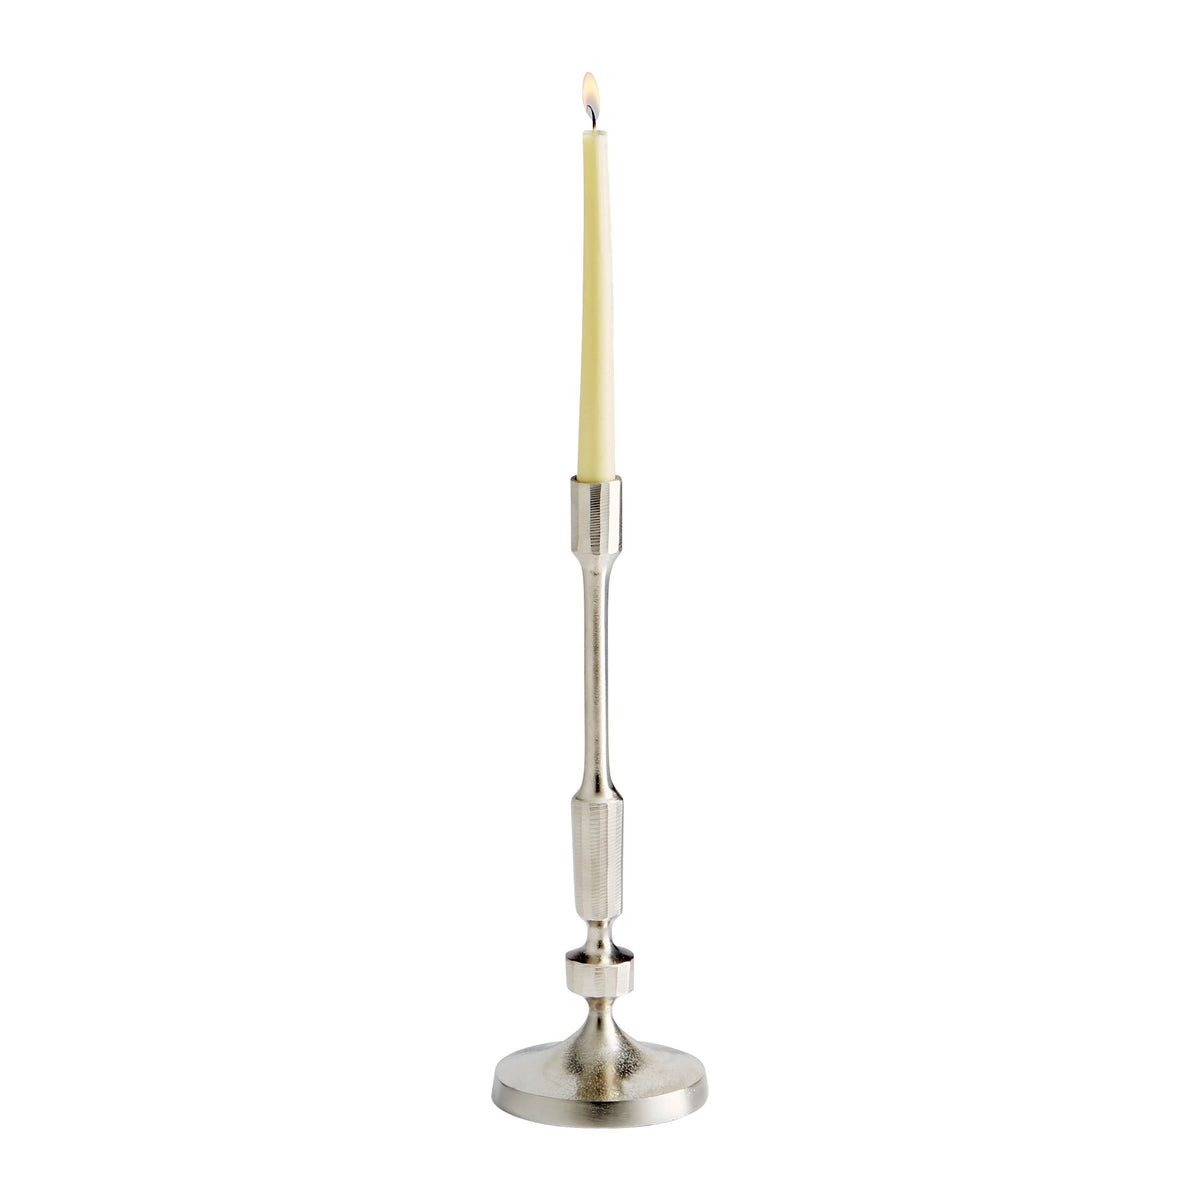 Cambria Candleholder-SM by Cyan